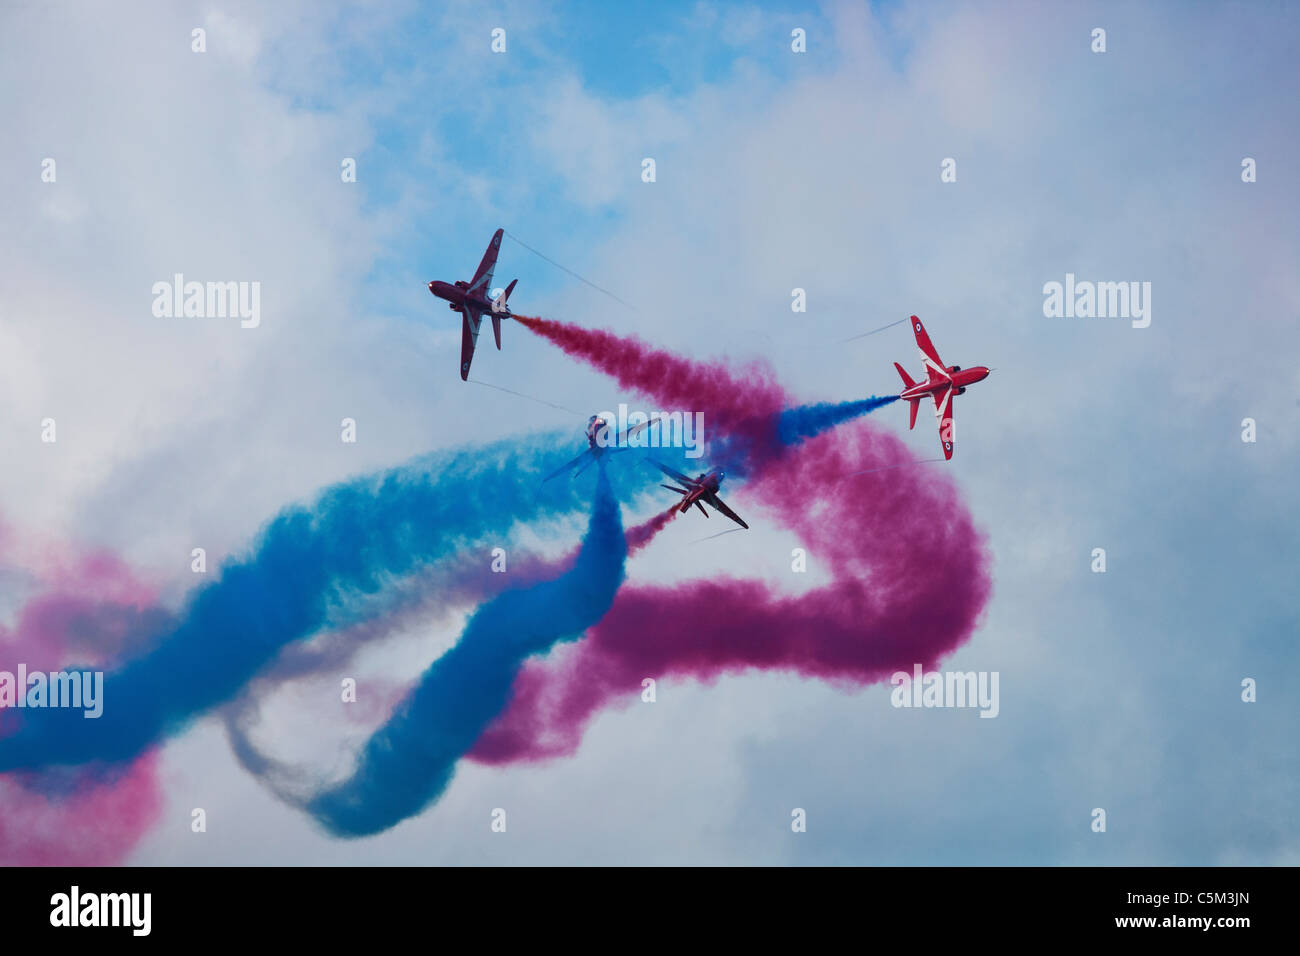 The Red Arrows performing a complicated maneuver with blue and red smoke behind Stock Photo